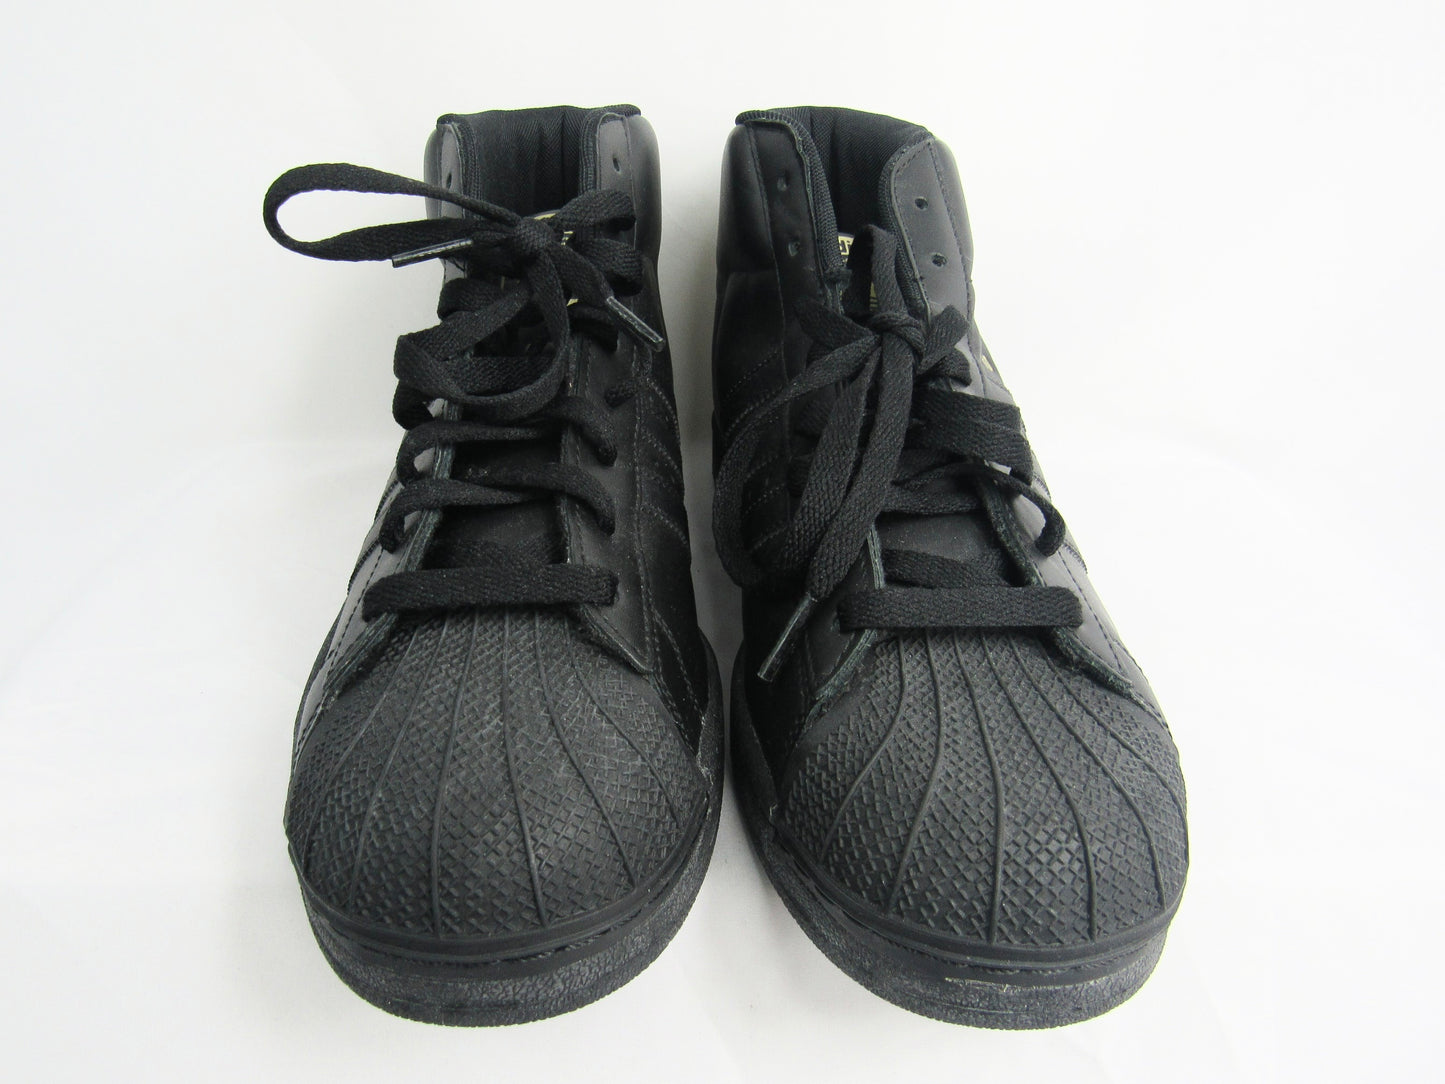 ADIDAS High Top Sneakers - Size 10